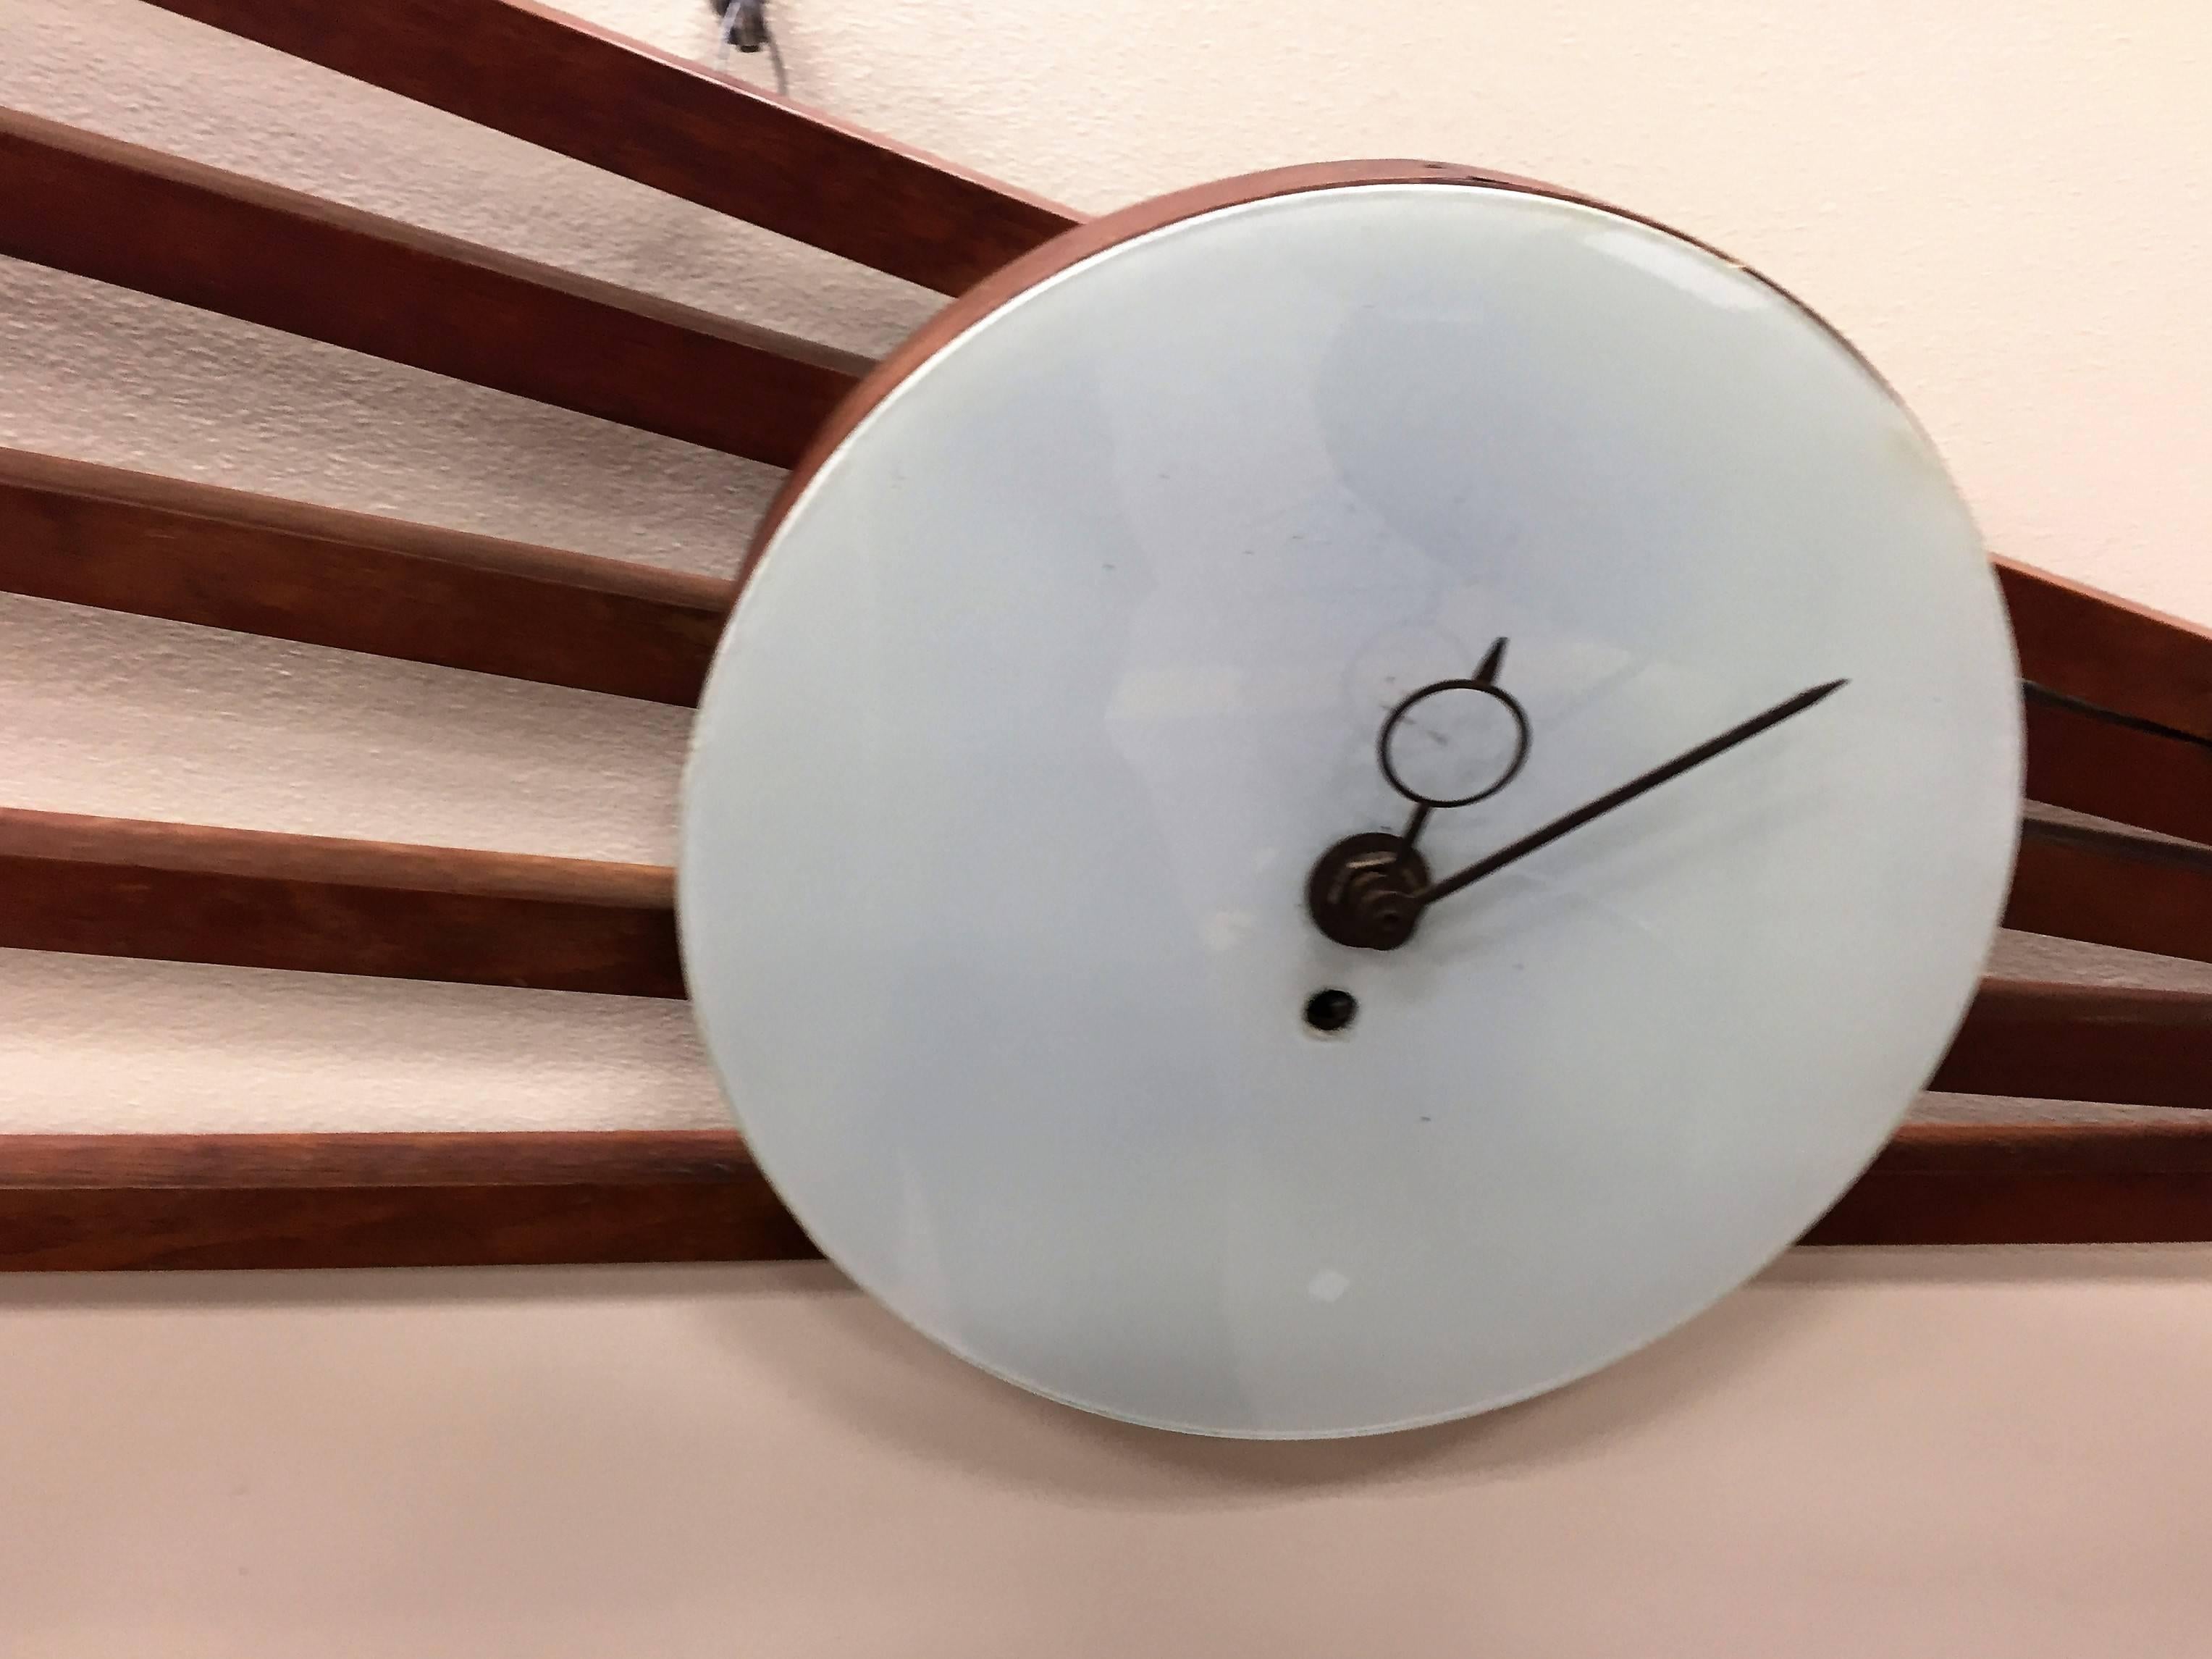 Comet like slatted wood and brass ball and stick wall clock with a key wind mechanism. Bright white enamel face. Great for a Mid-Century high end space,
for form and function alike.